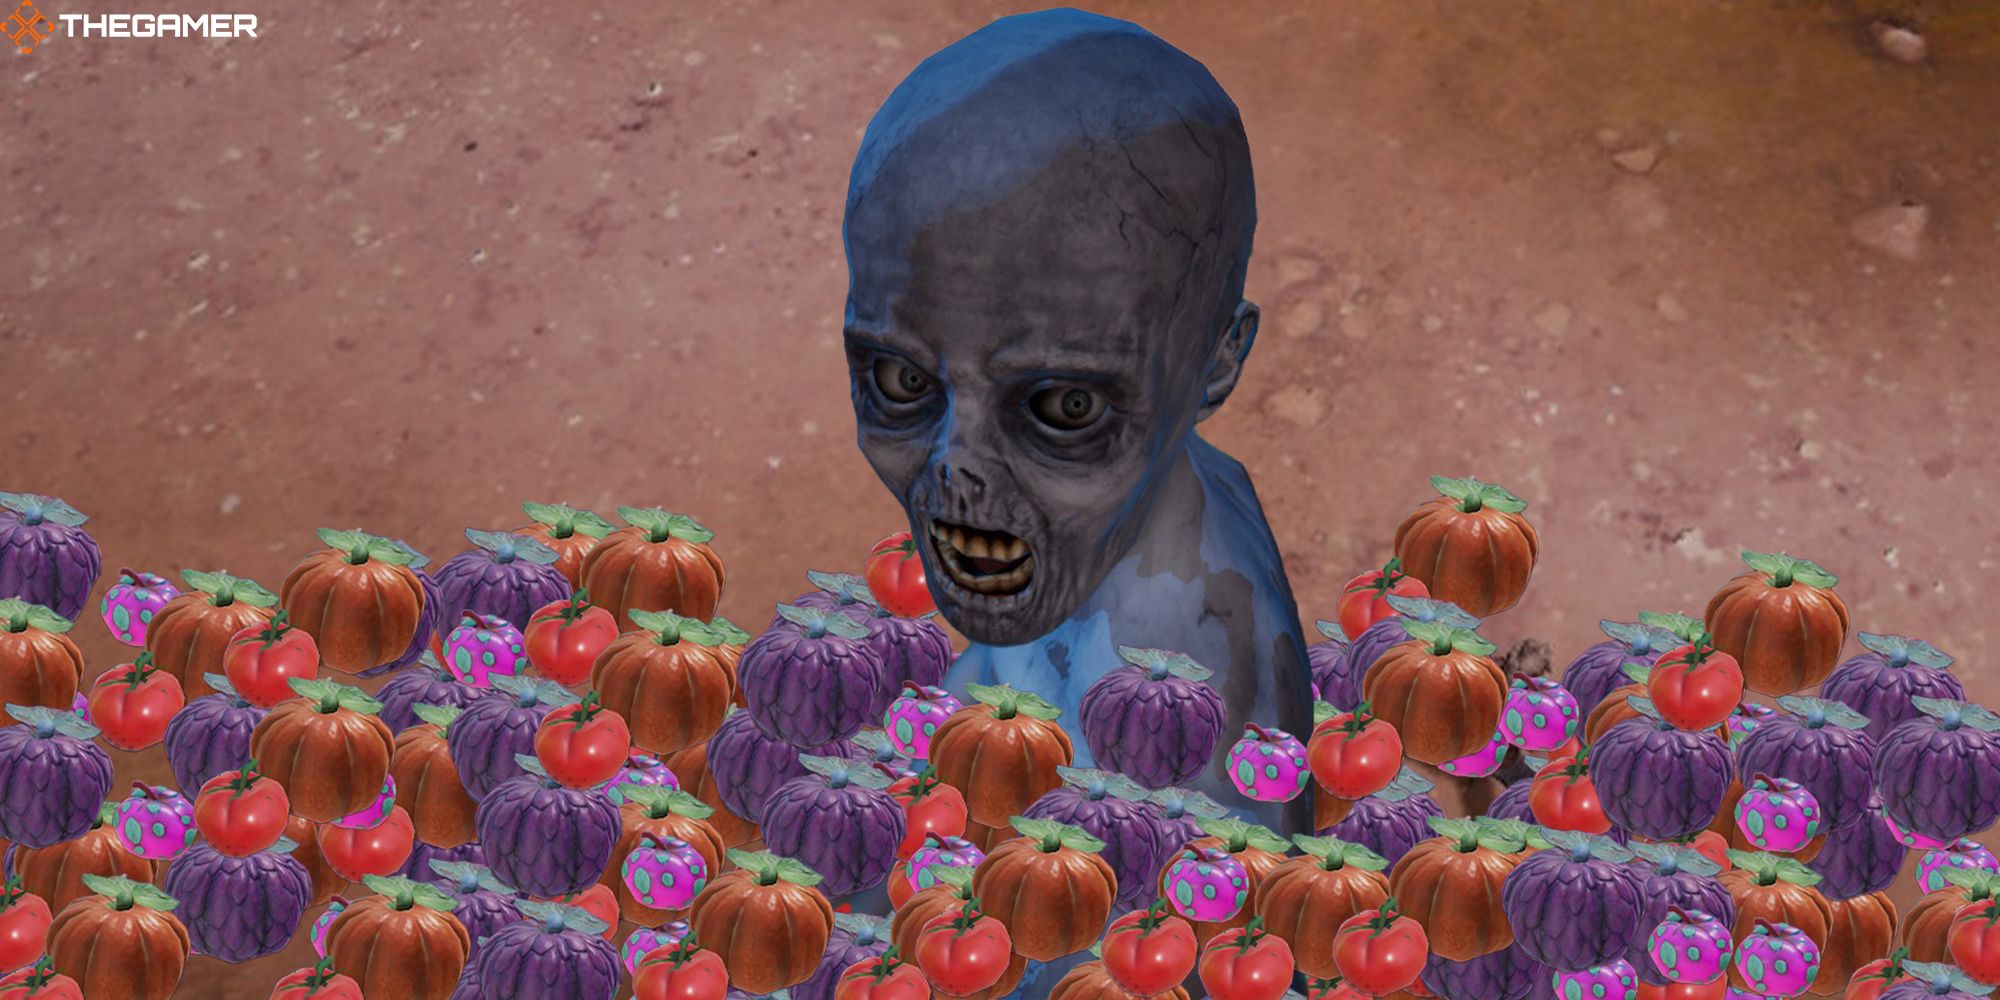 A zombie emerges from a patch of pumpkins, tomatoes, and zombie vegetables in Deadcraft. Custom image for TG.